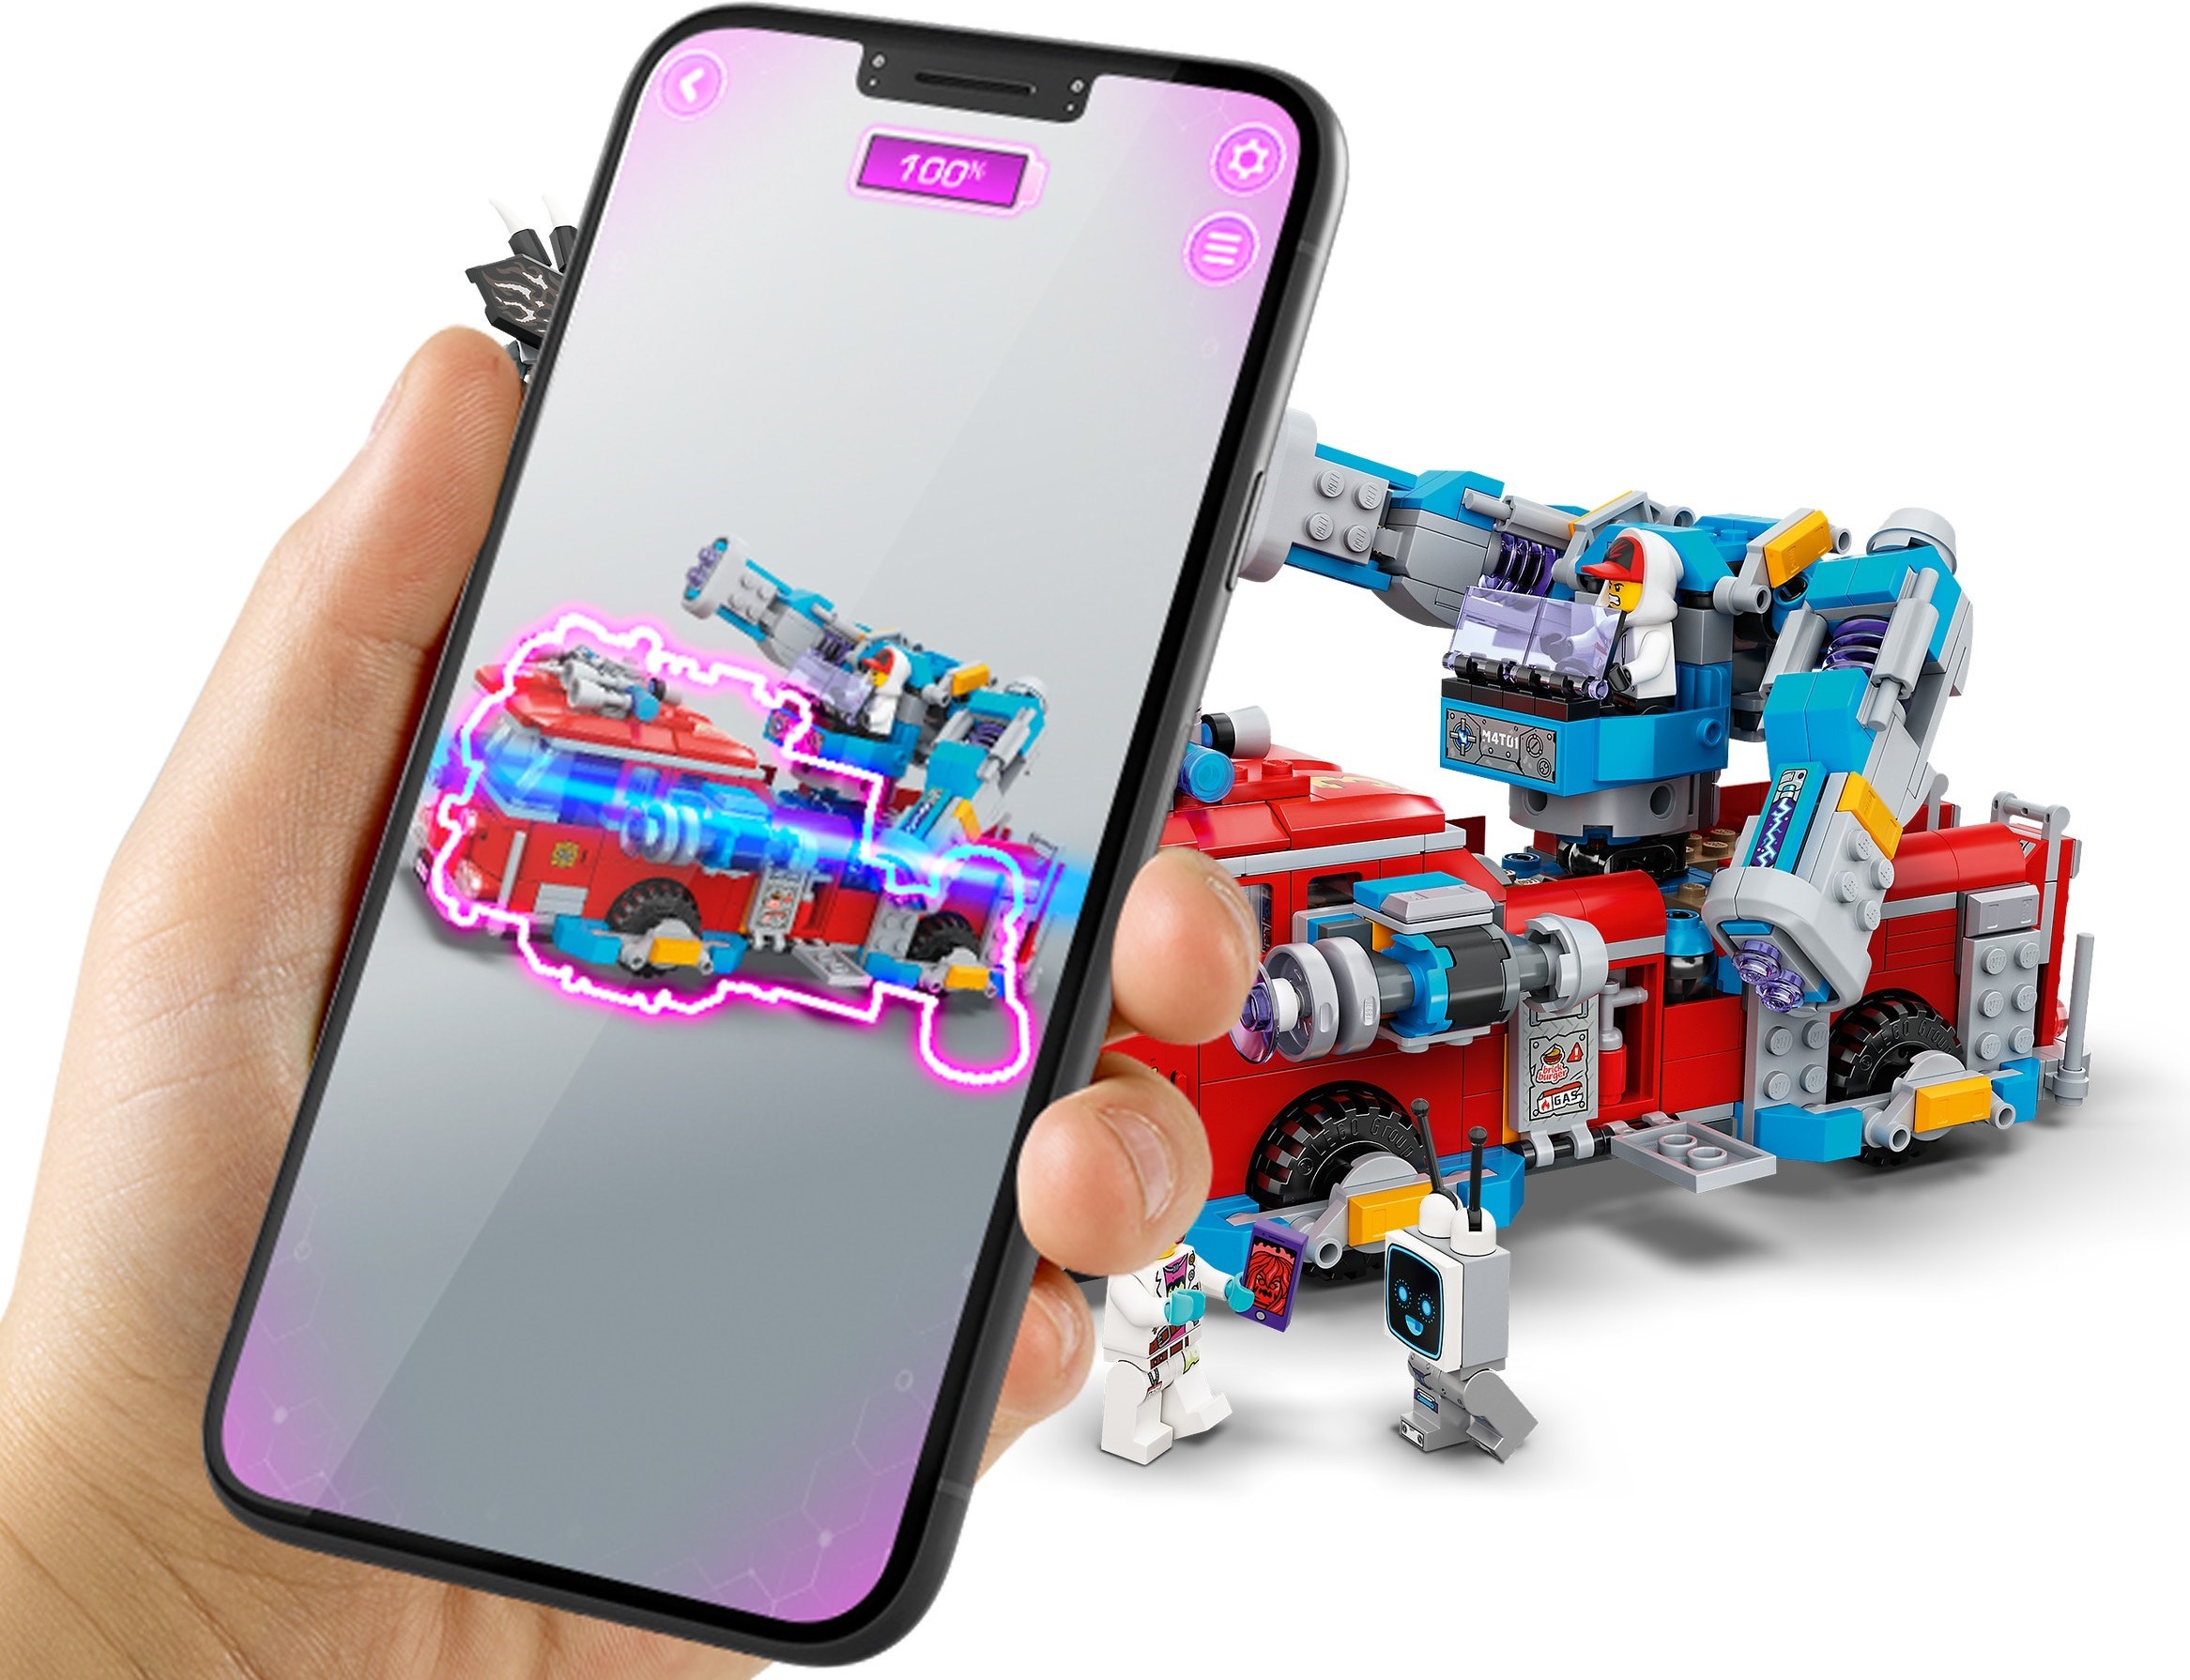 App-Driven Ghost-Hunting Kit Augmented Reality Includes a Mecha Robot LEGO Hidden Side Phantom Fire Truck 3000 70436 New 2020 5 Minifigures and a Harbinger Figure AR Fire Truck Toy 760 Pieces